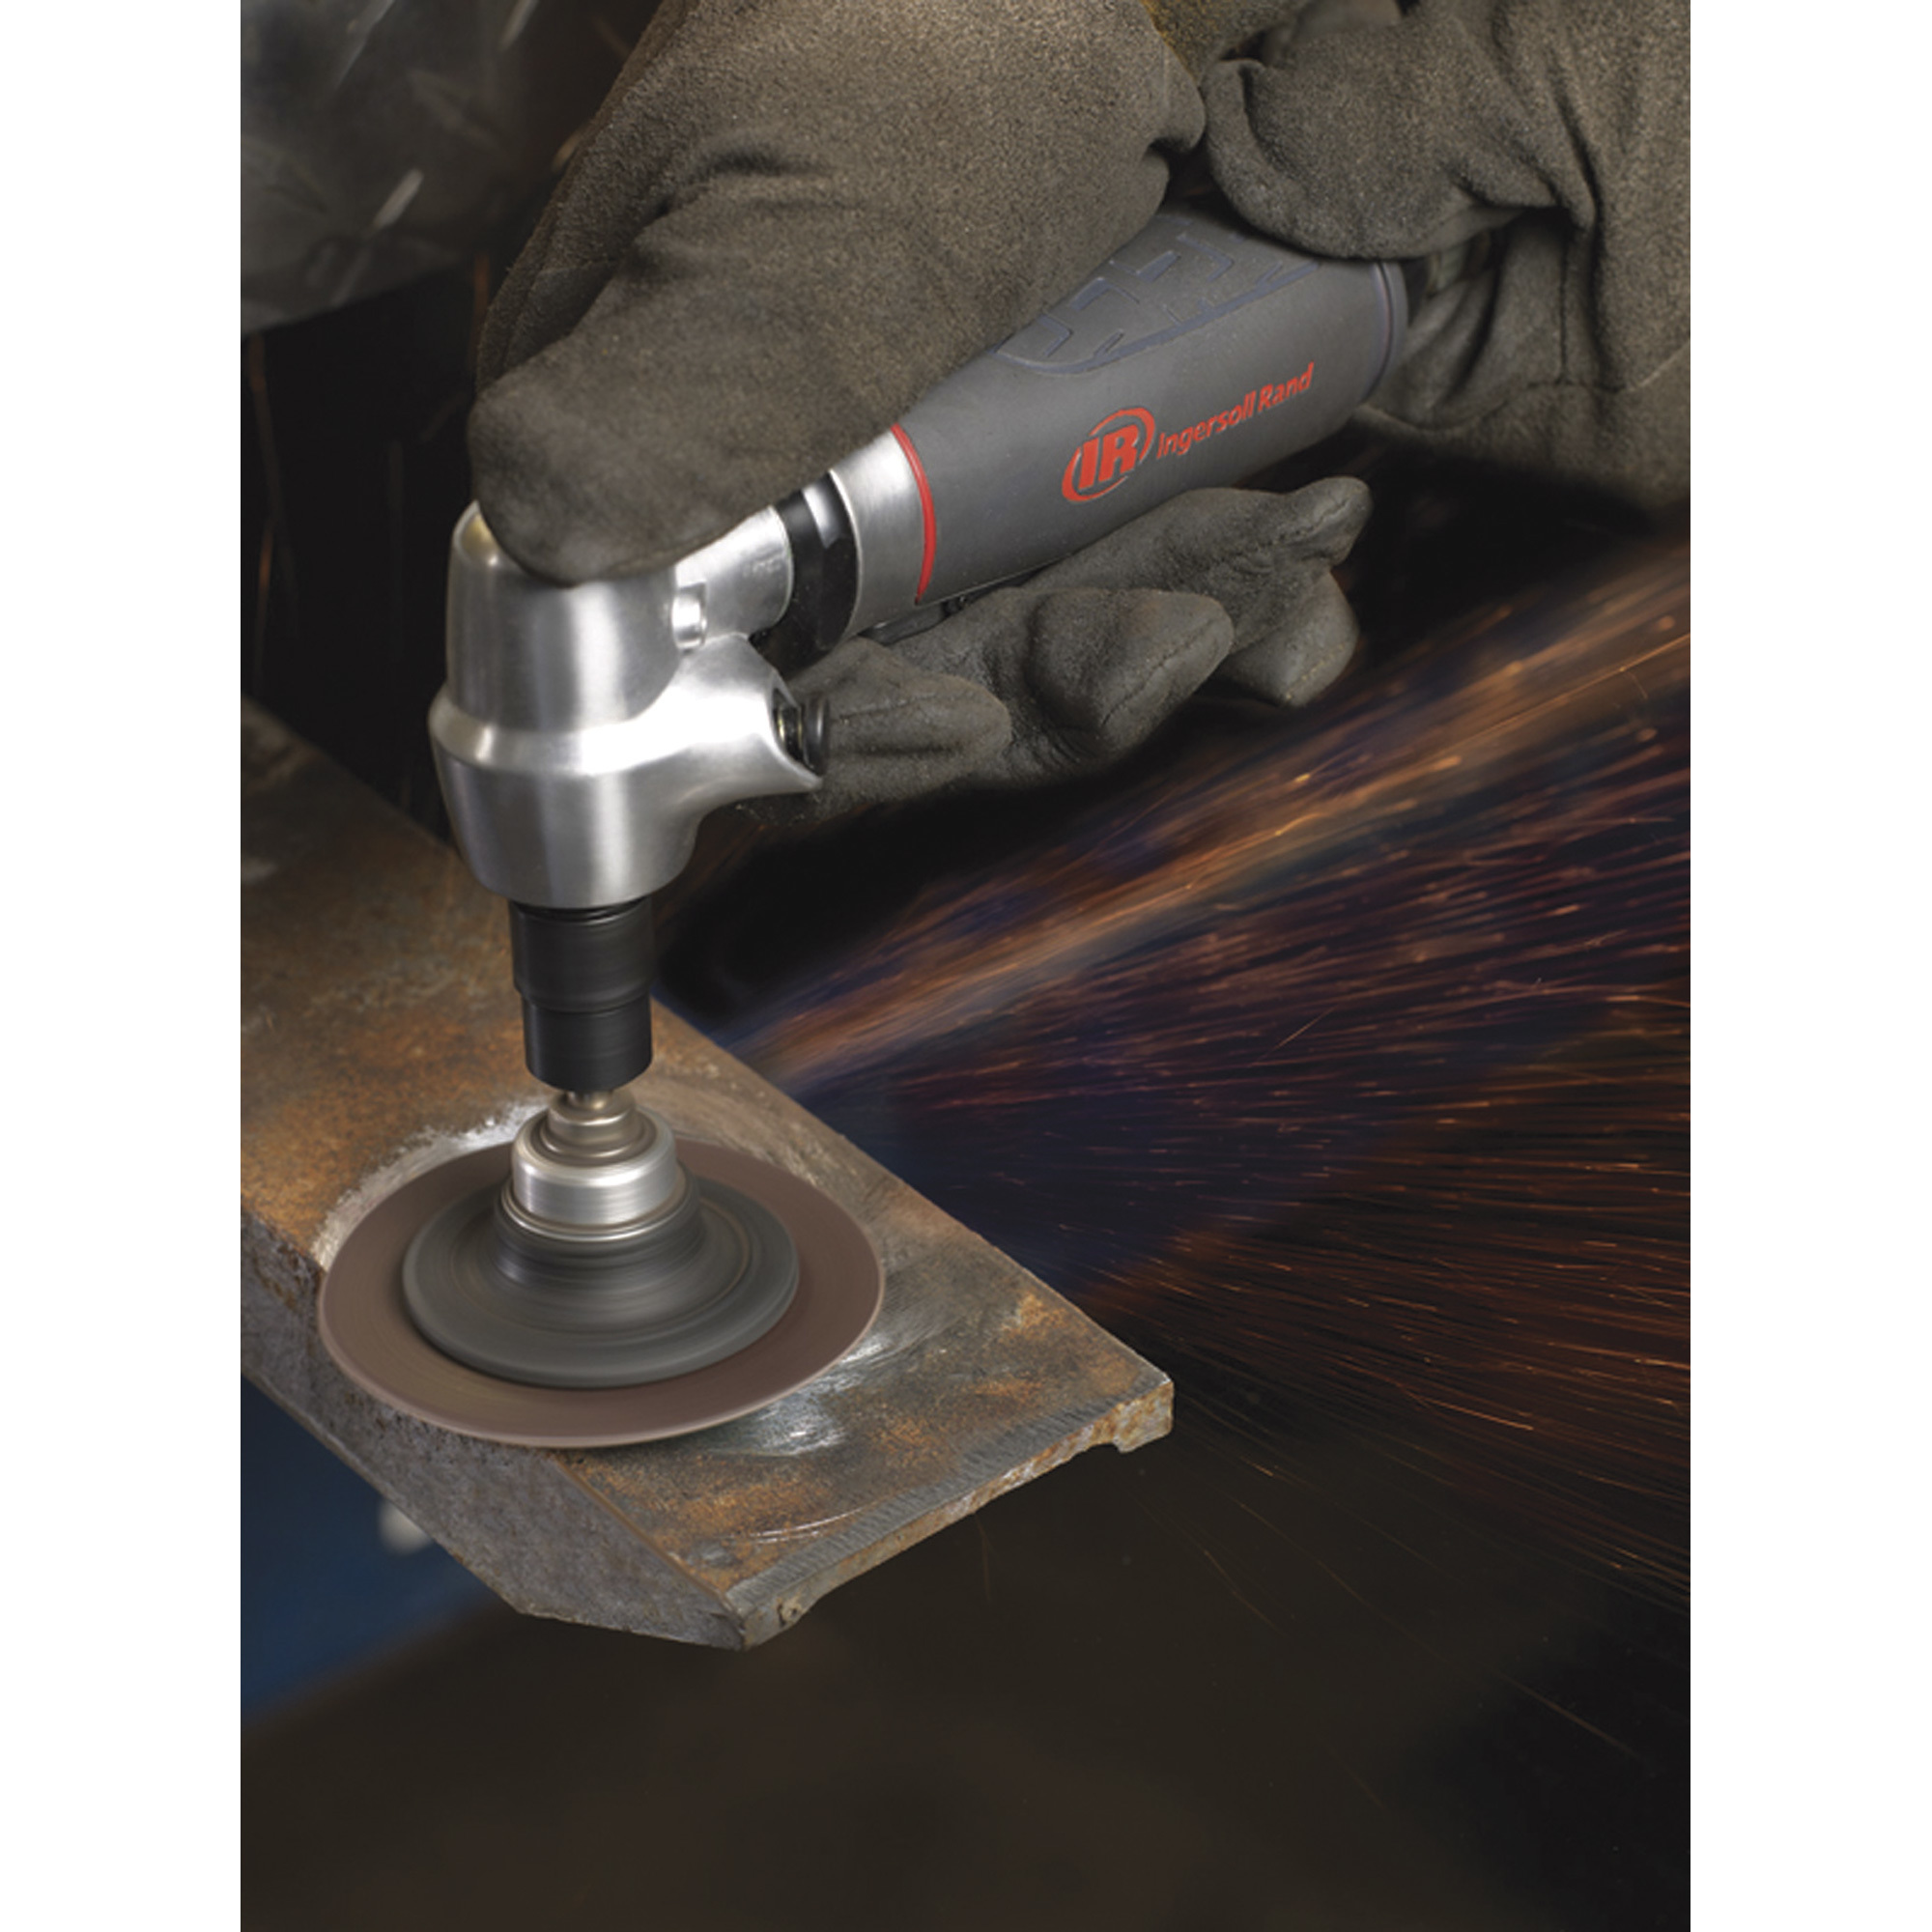 Ingersoll Rand MAX Air Angle Die Grinder, 1/4Inch, Model 5102MAX